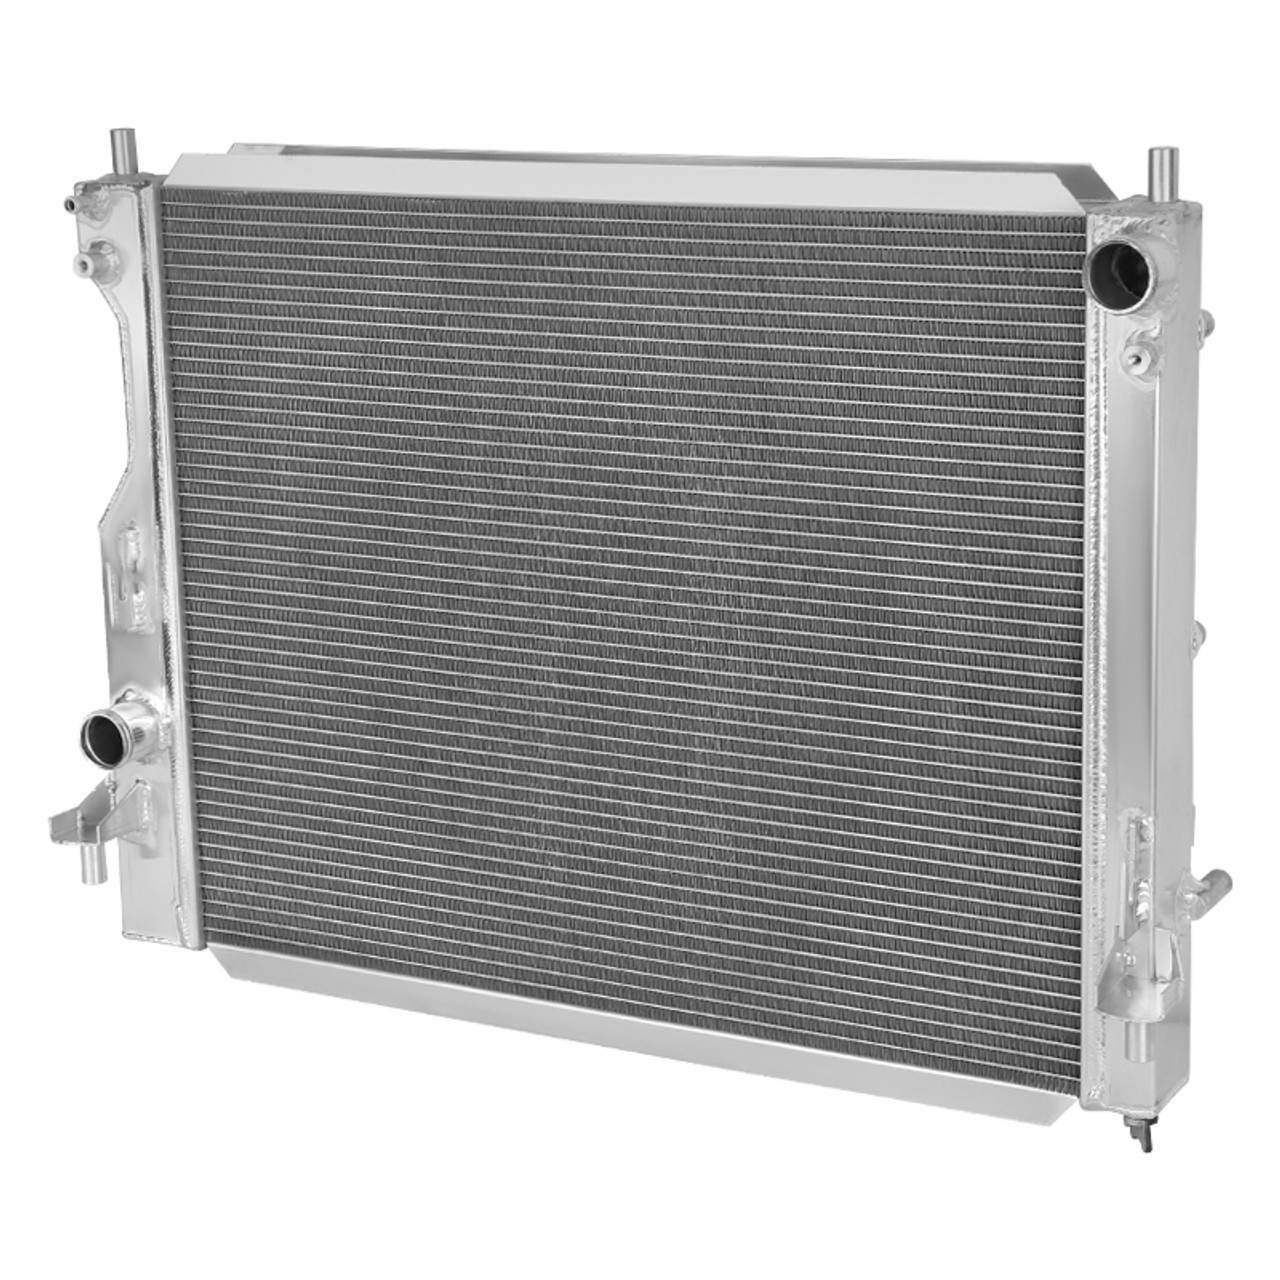 2005-2014 Ford Mustang 3.7L-5.0L AT/MTのアルミニウム3列冷却ラジエーターAluminum 3-Rows Cooling Radiator For 2005-2014 Ford Mustan